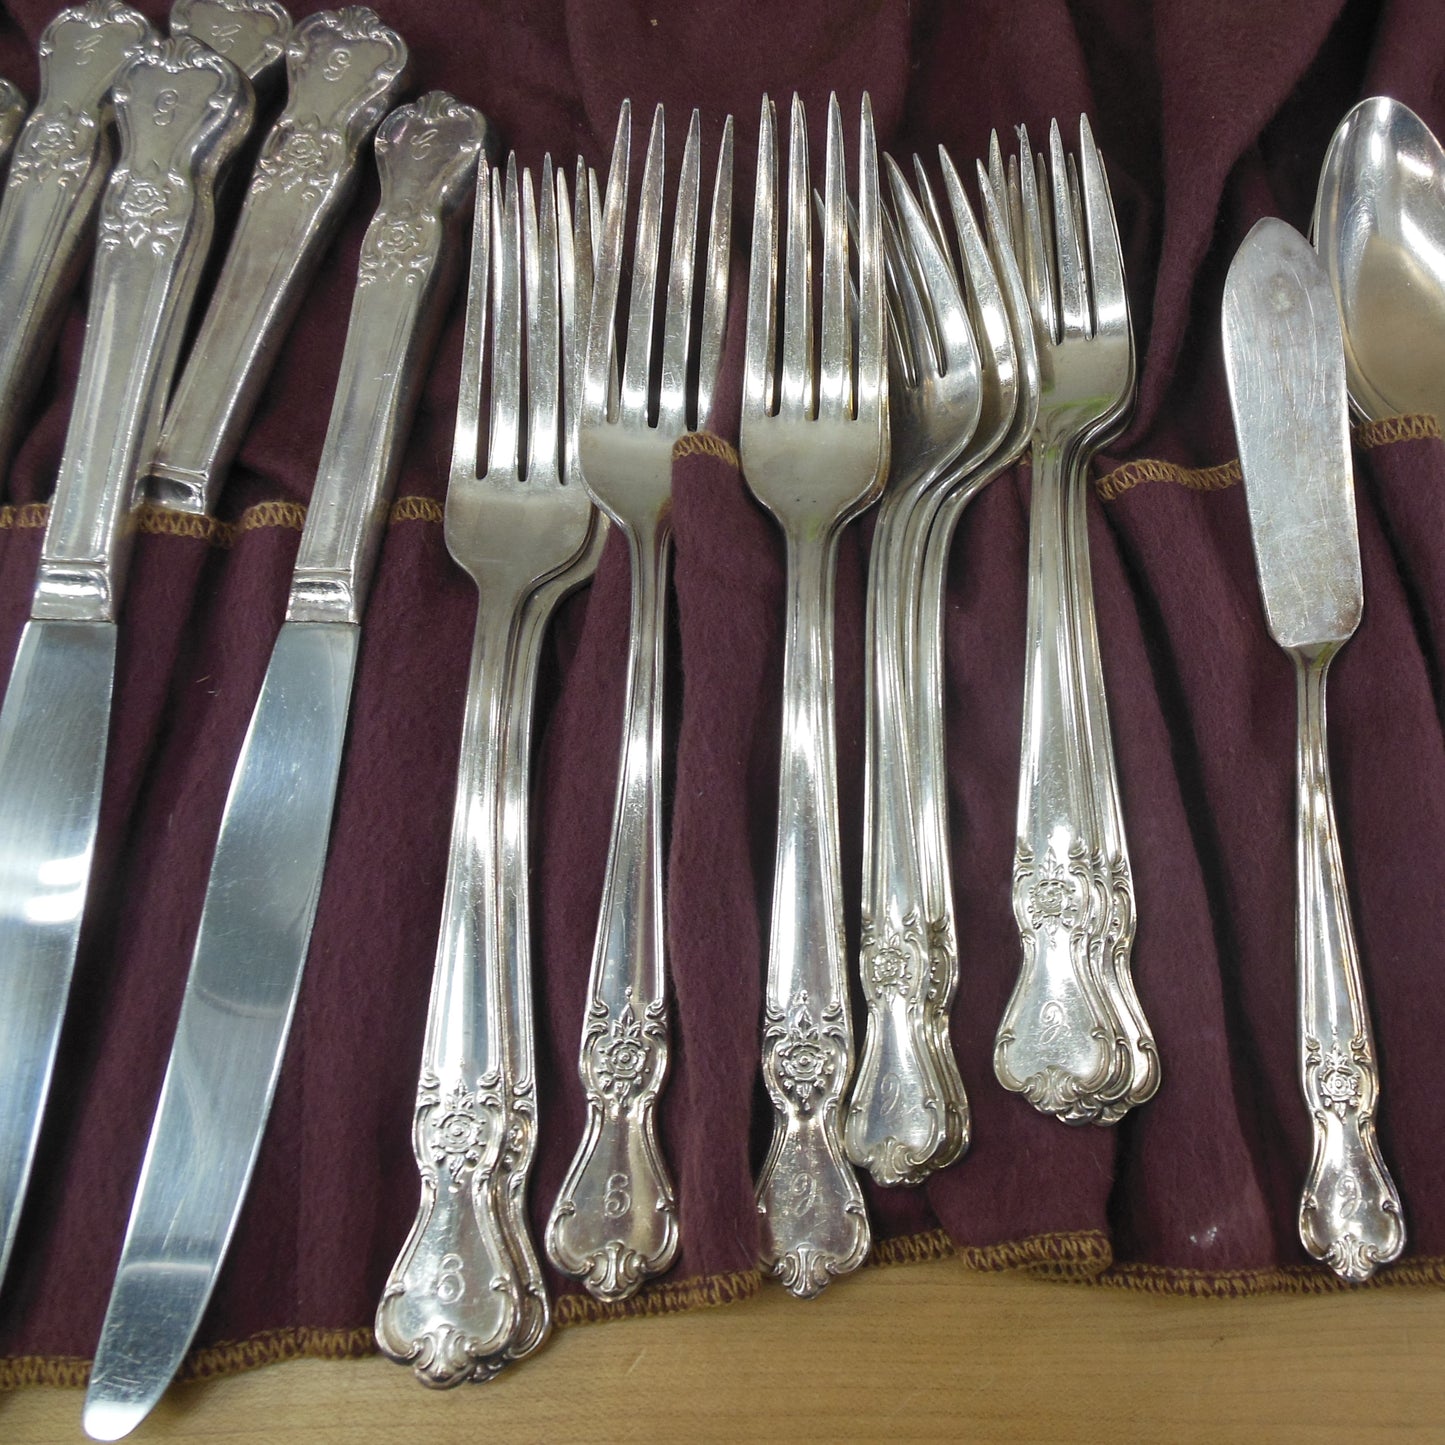 Old Company Plate Signature Rose Flatware Set Service for 6 - 47 Pieces spoon fork knife